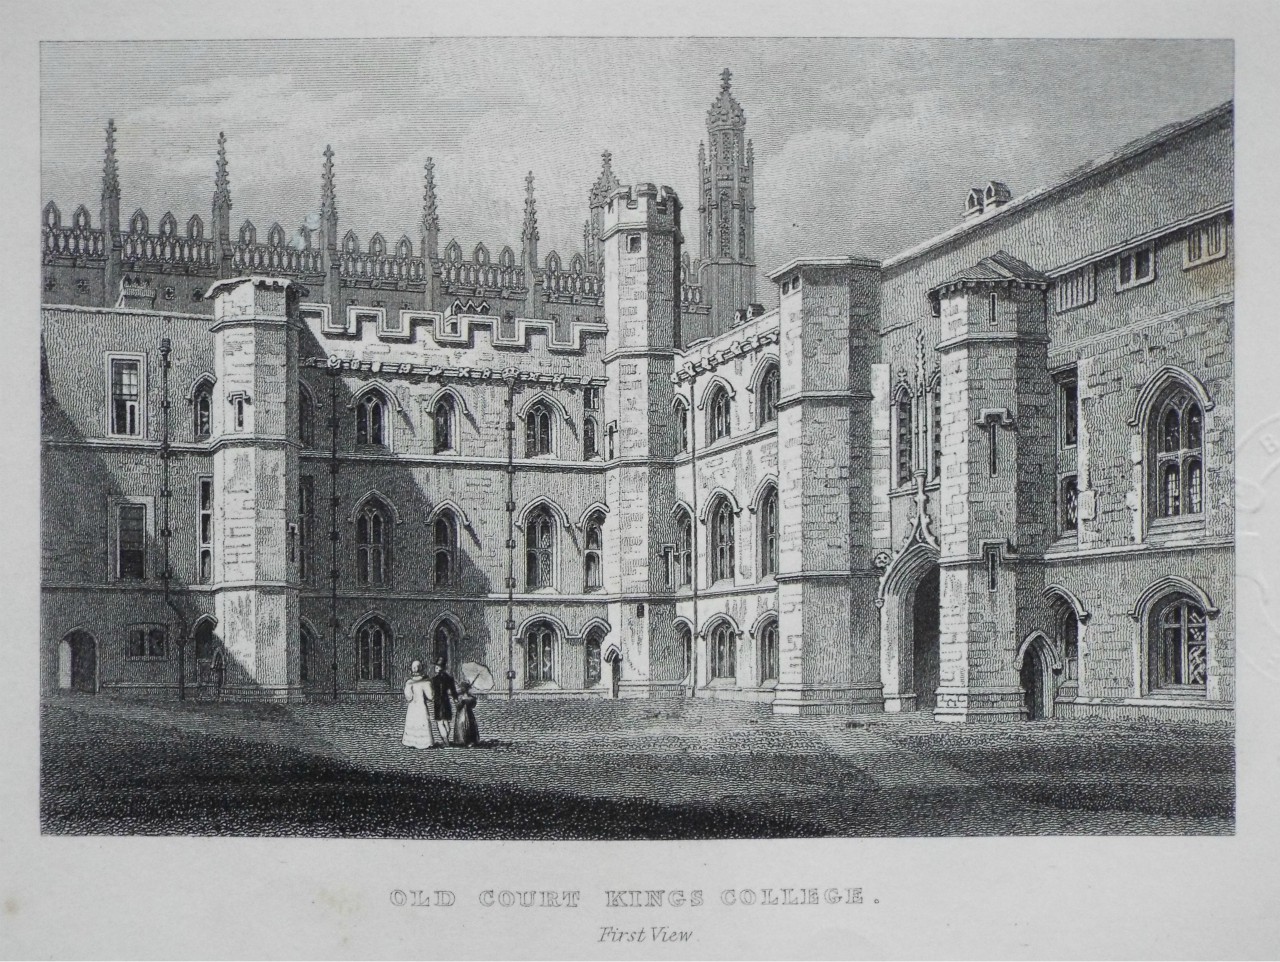 Print - Old Court, Kings College. First View